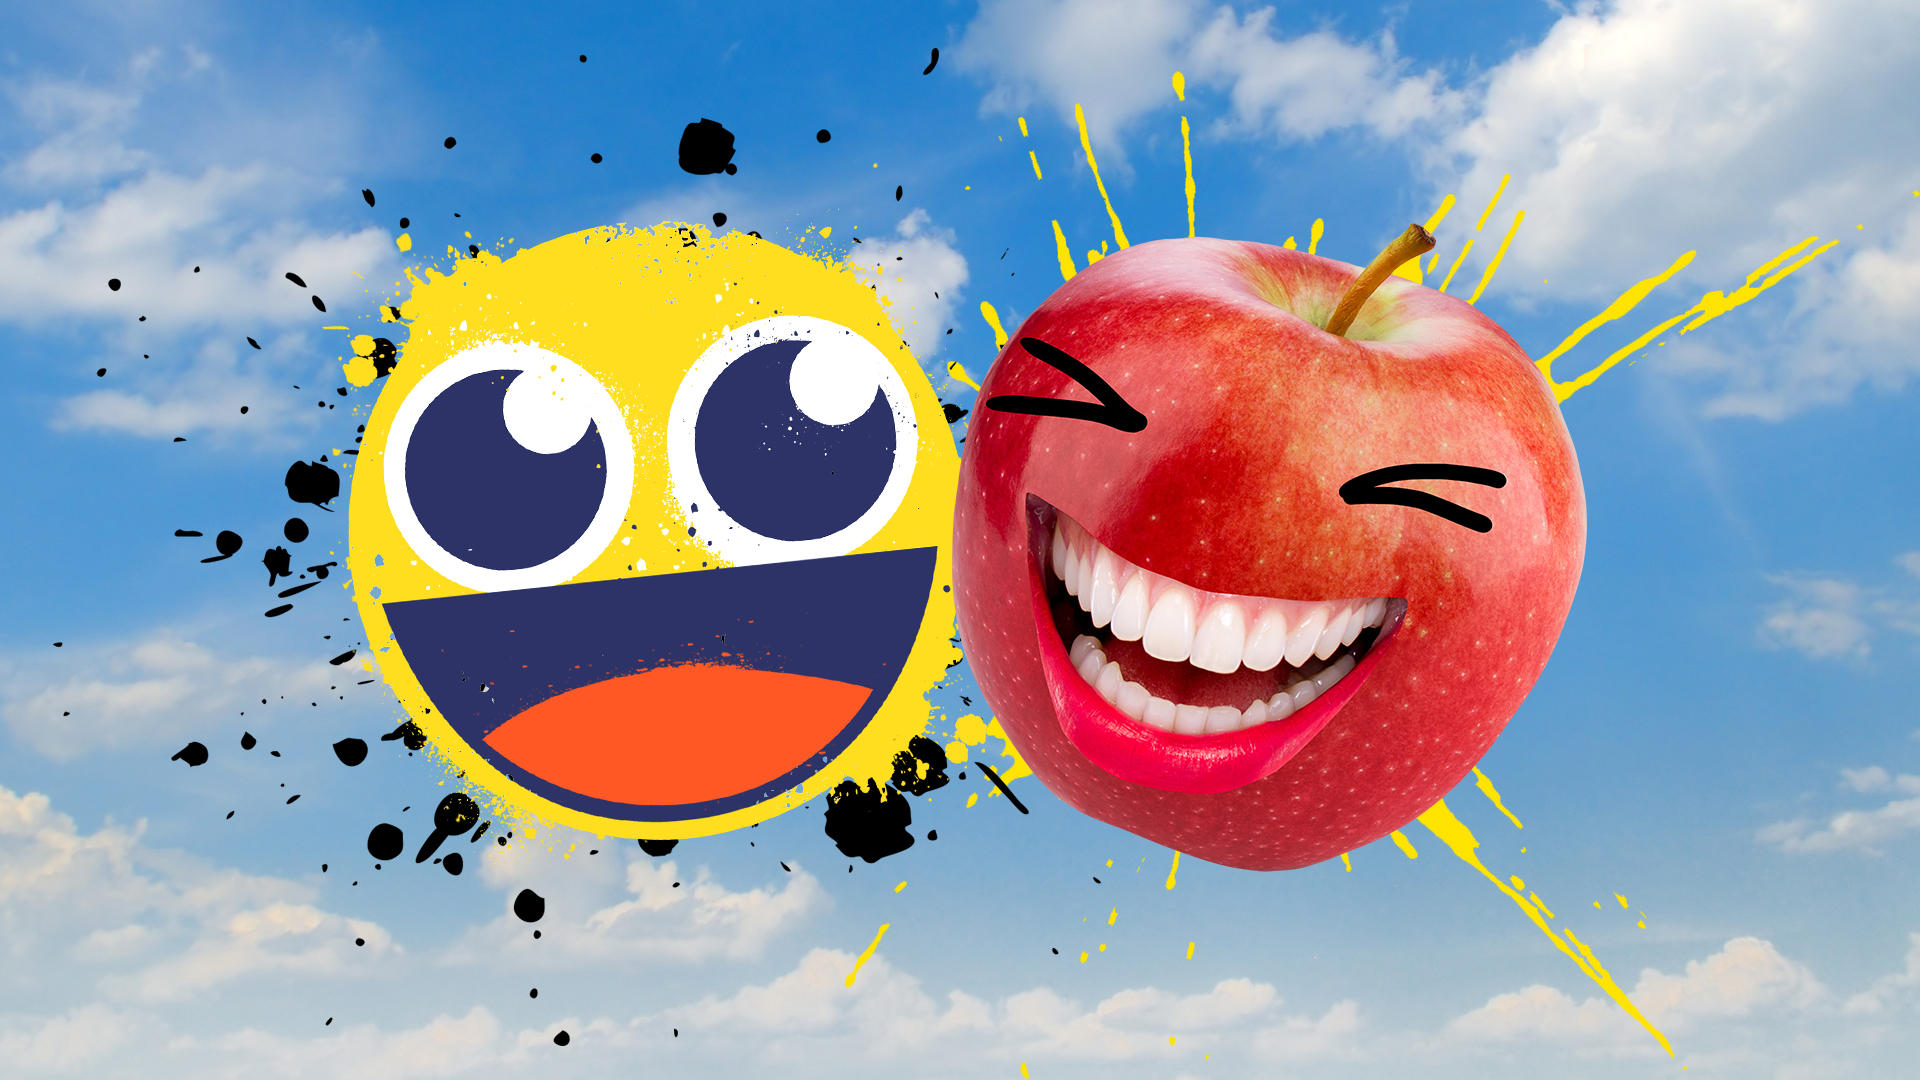 A laughing emoji and giggling red apple